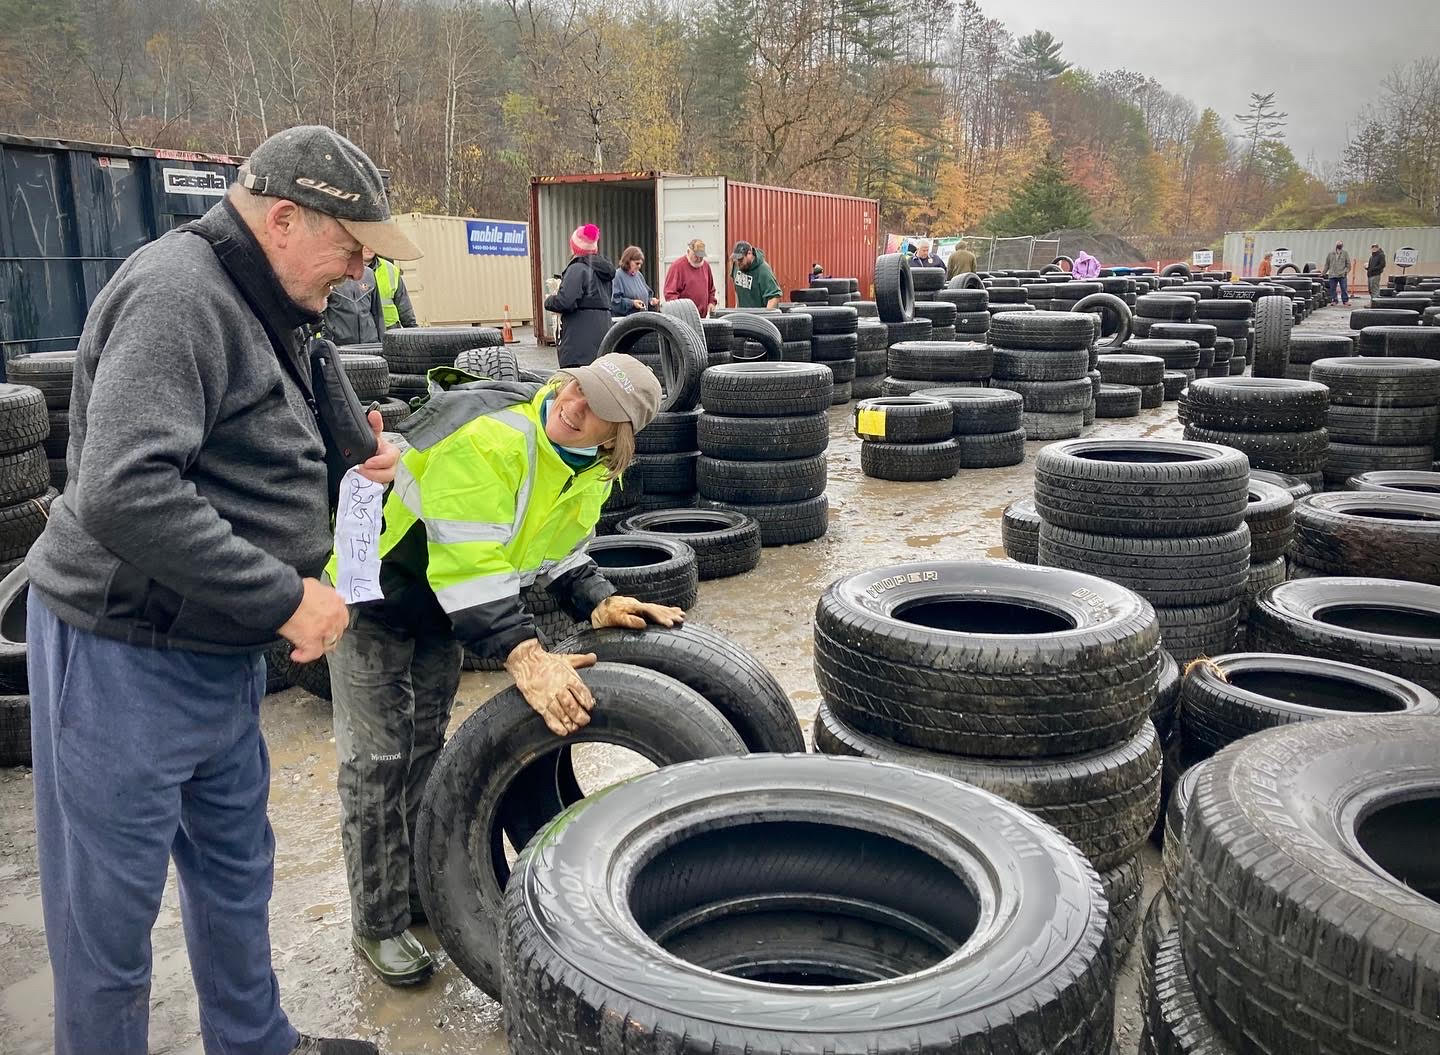  Wheels for Warmth Tire Sale Set for This Weekend 